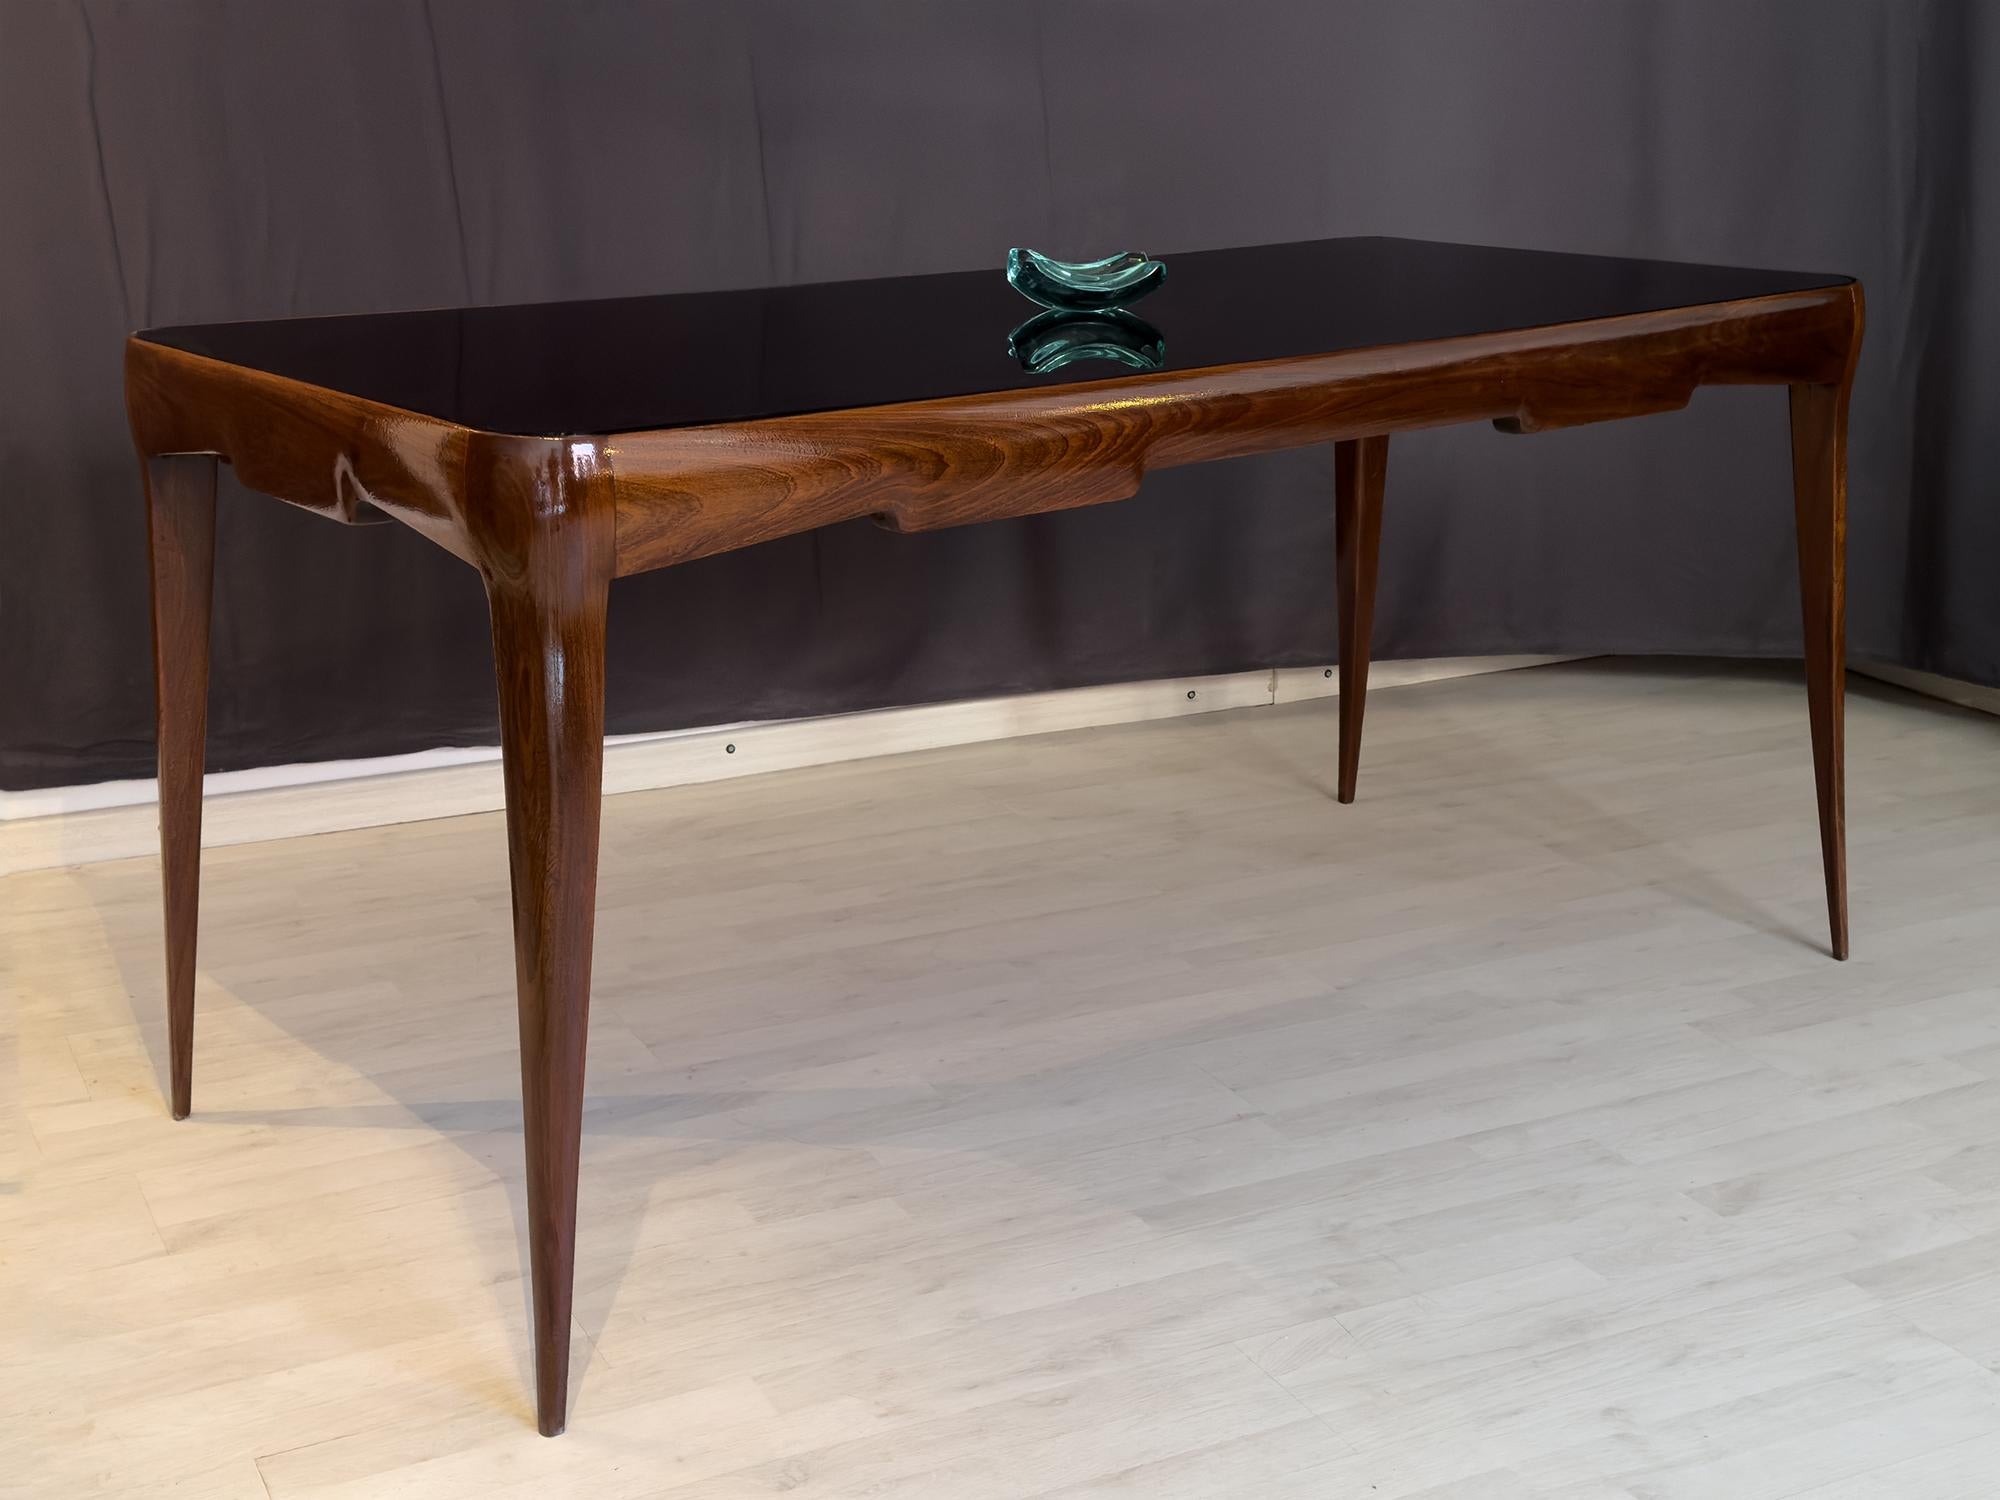 Stunning Italian walnut dining table of the 1950s, characterized by a unique soft design, very stylish and charming.
Its seductive structure, very thin and slight, is unexpectedly very solid, balanced and stable.
It is in very good condition of the